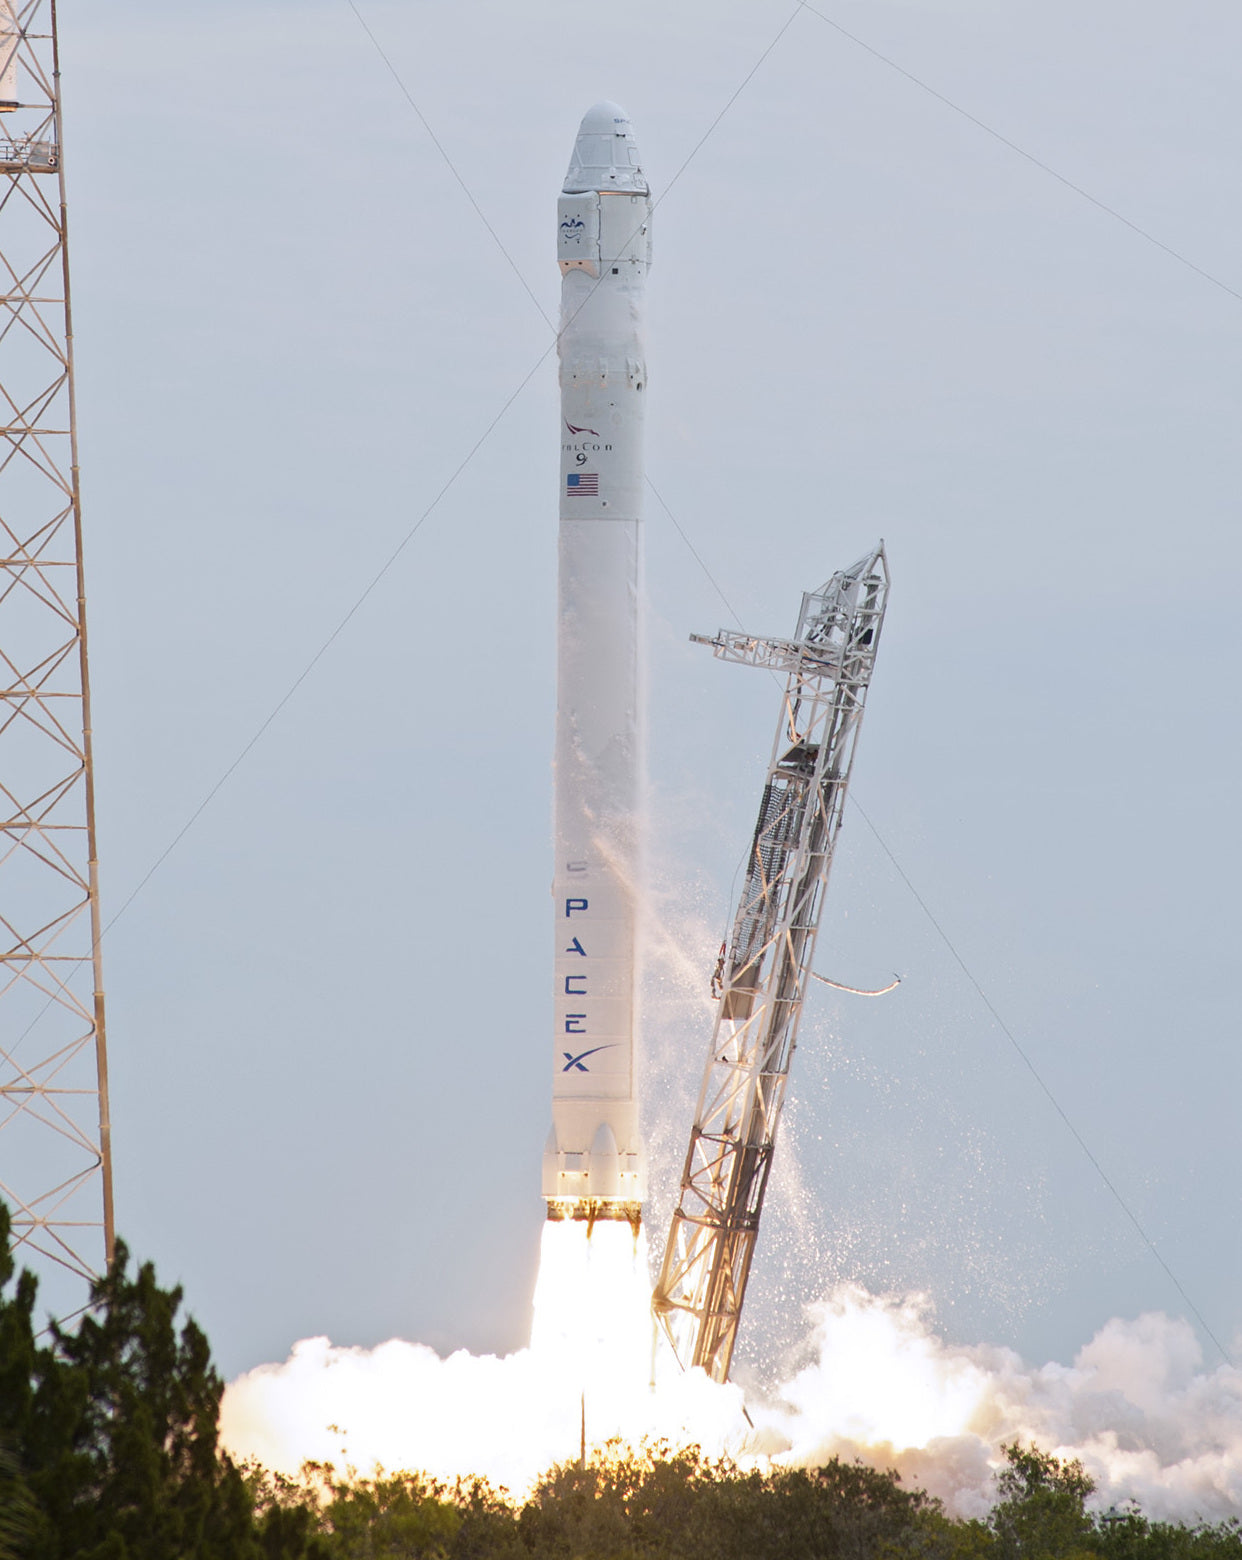 SPACE X FALCON 9 ROCKET LAUNCH GLOSSY POSTER PICTURE PHOTO PRINT BANNER